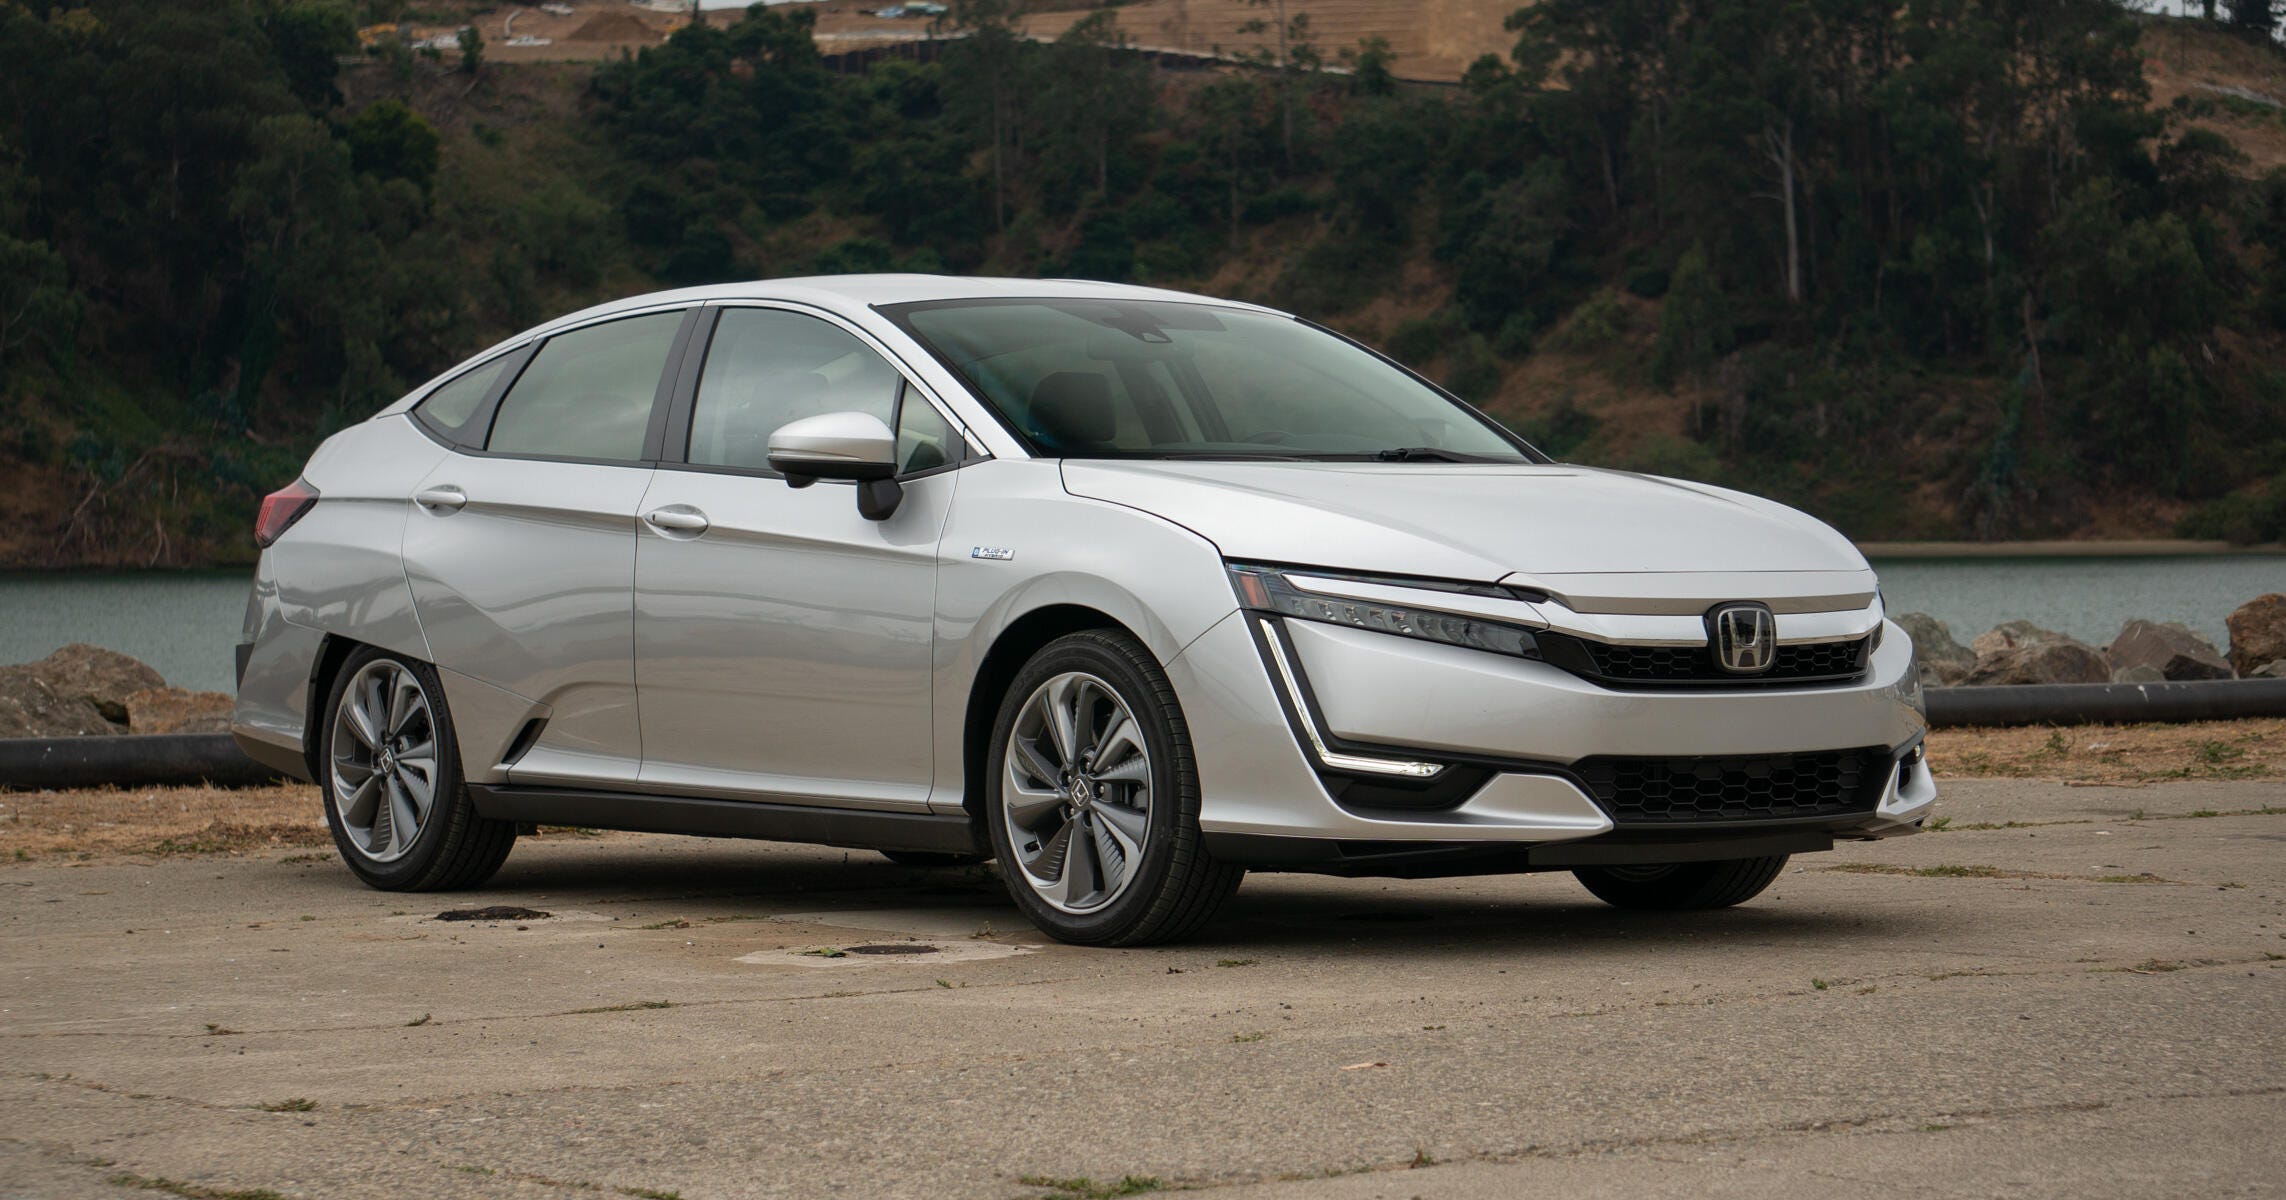 Honda Clarity range will end production this year - CNET